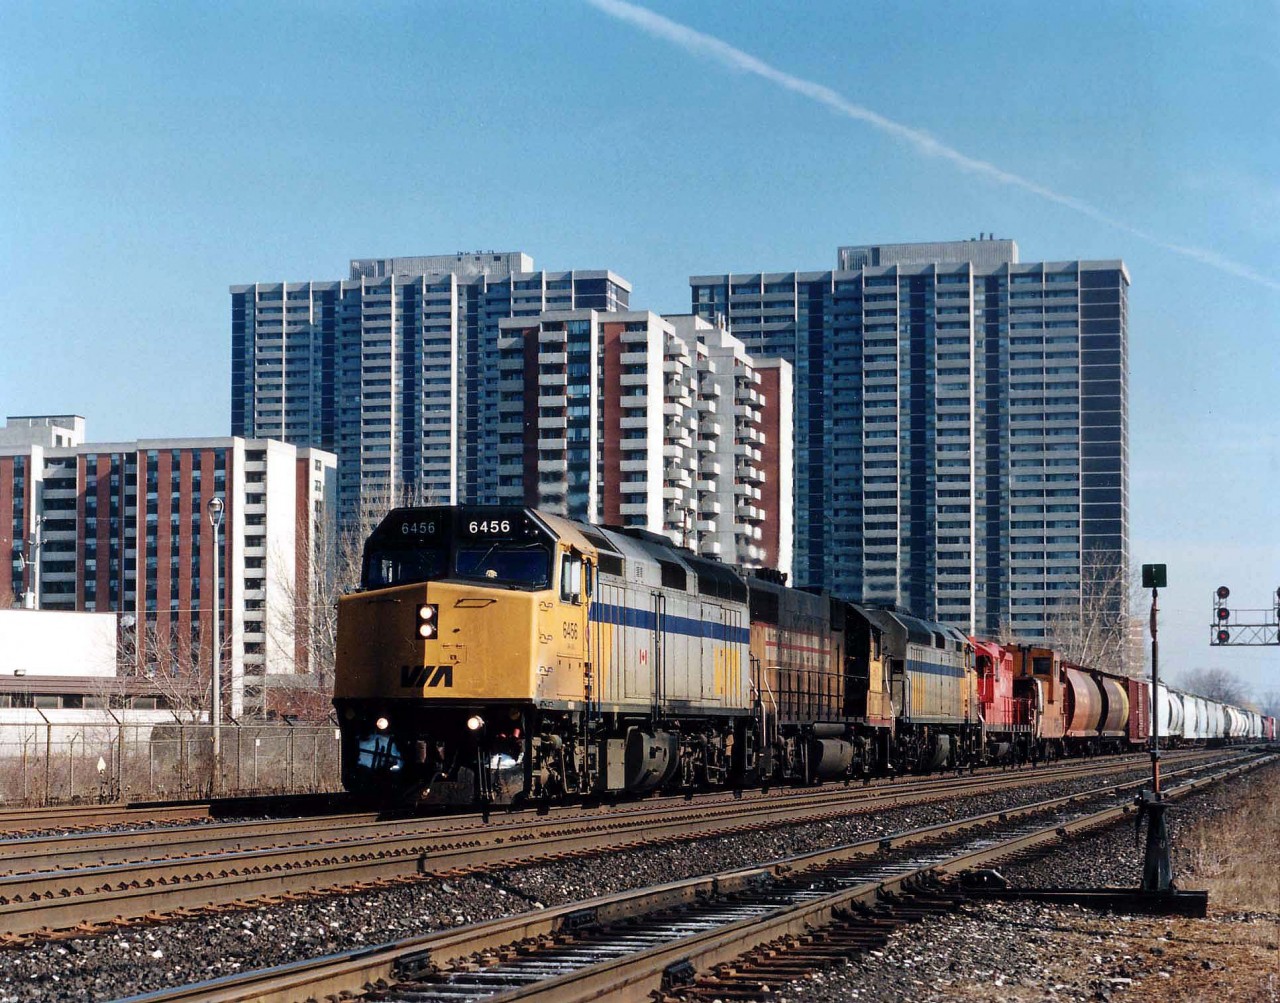 Back in those delightful days (for the fans) of no-end CP leasing, we see the Guelph Jct. turn westbound for the Jct with VIA 6456, HATX 216, VIA 6455 and CP 8241 passing thru Etobicoke on a crisp, clear March 12, 1995. This train wyed their power at Guelph Jct. before heading back east.  Yes, it was power worth following.